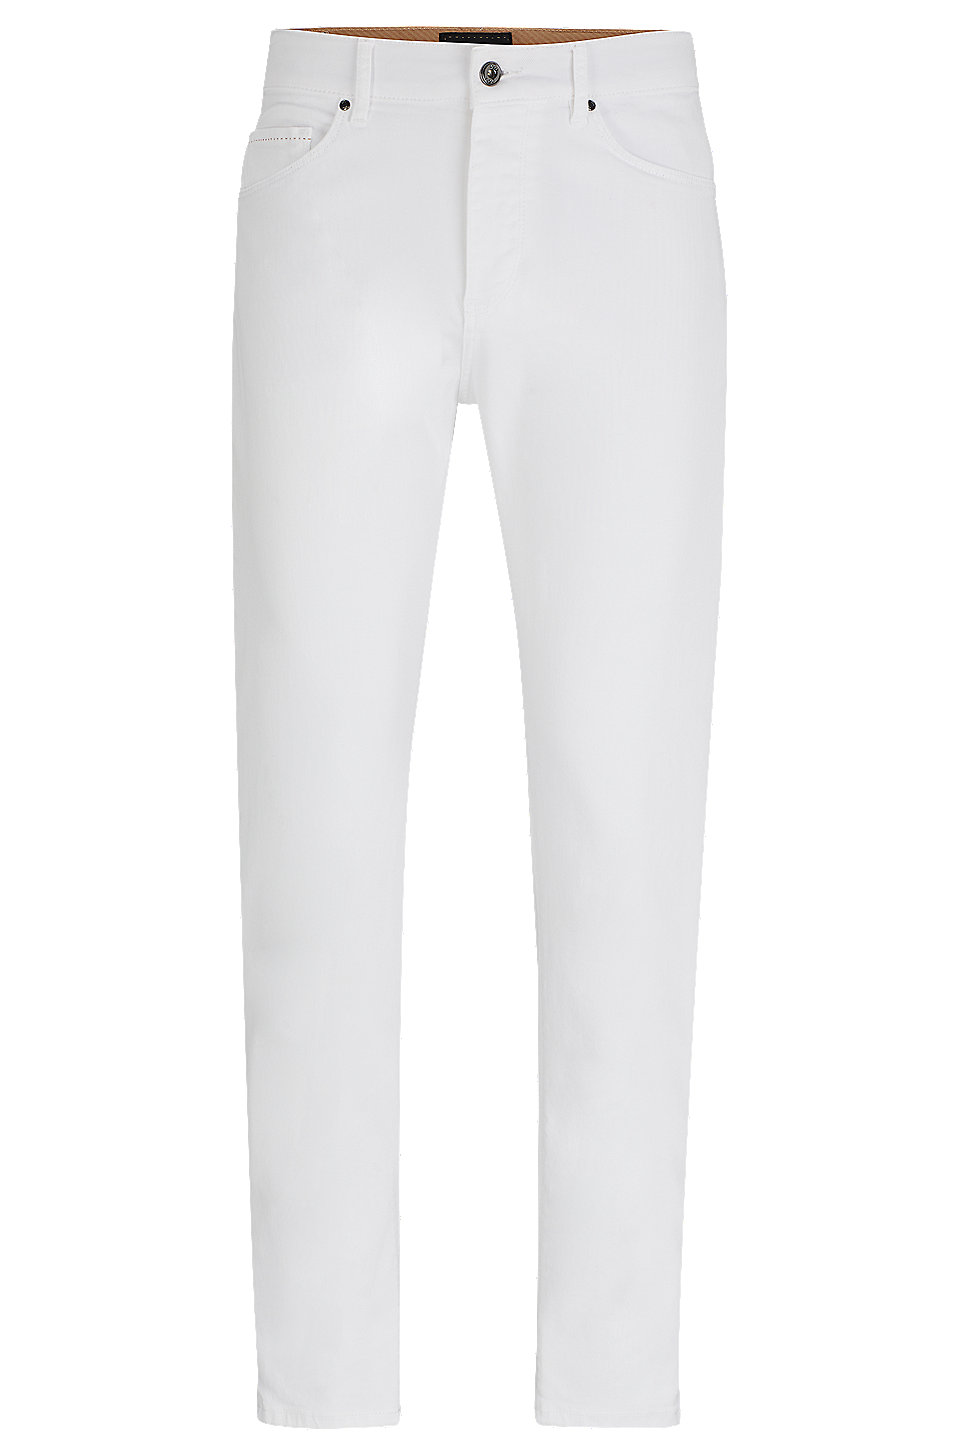 BOSS - Tapered-fit jeans in white Italian stretch denim